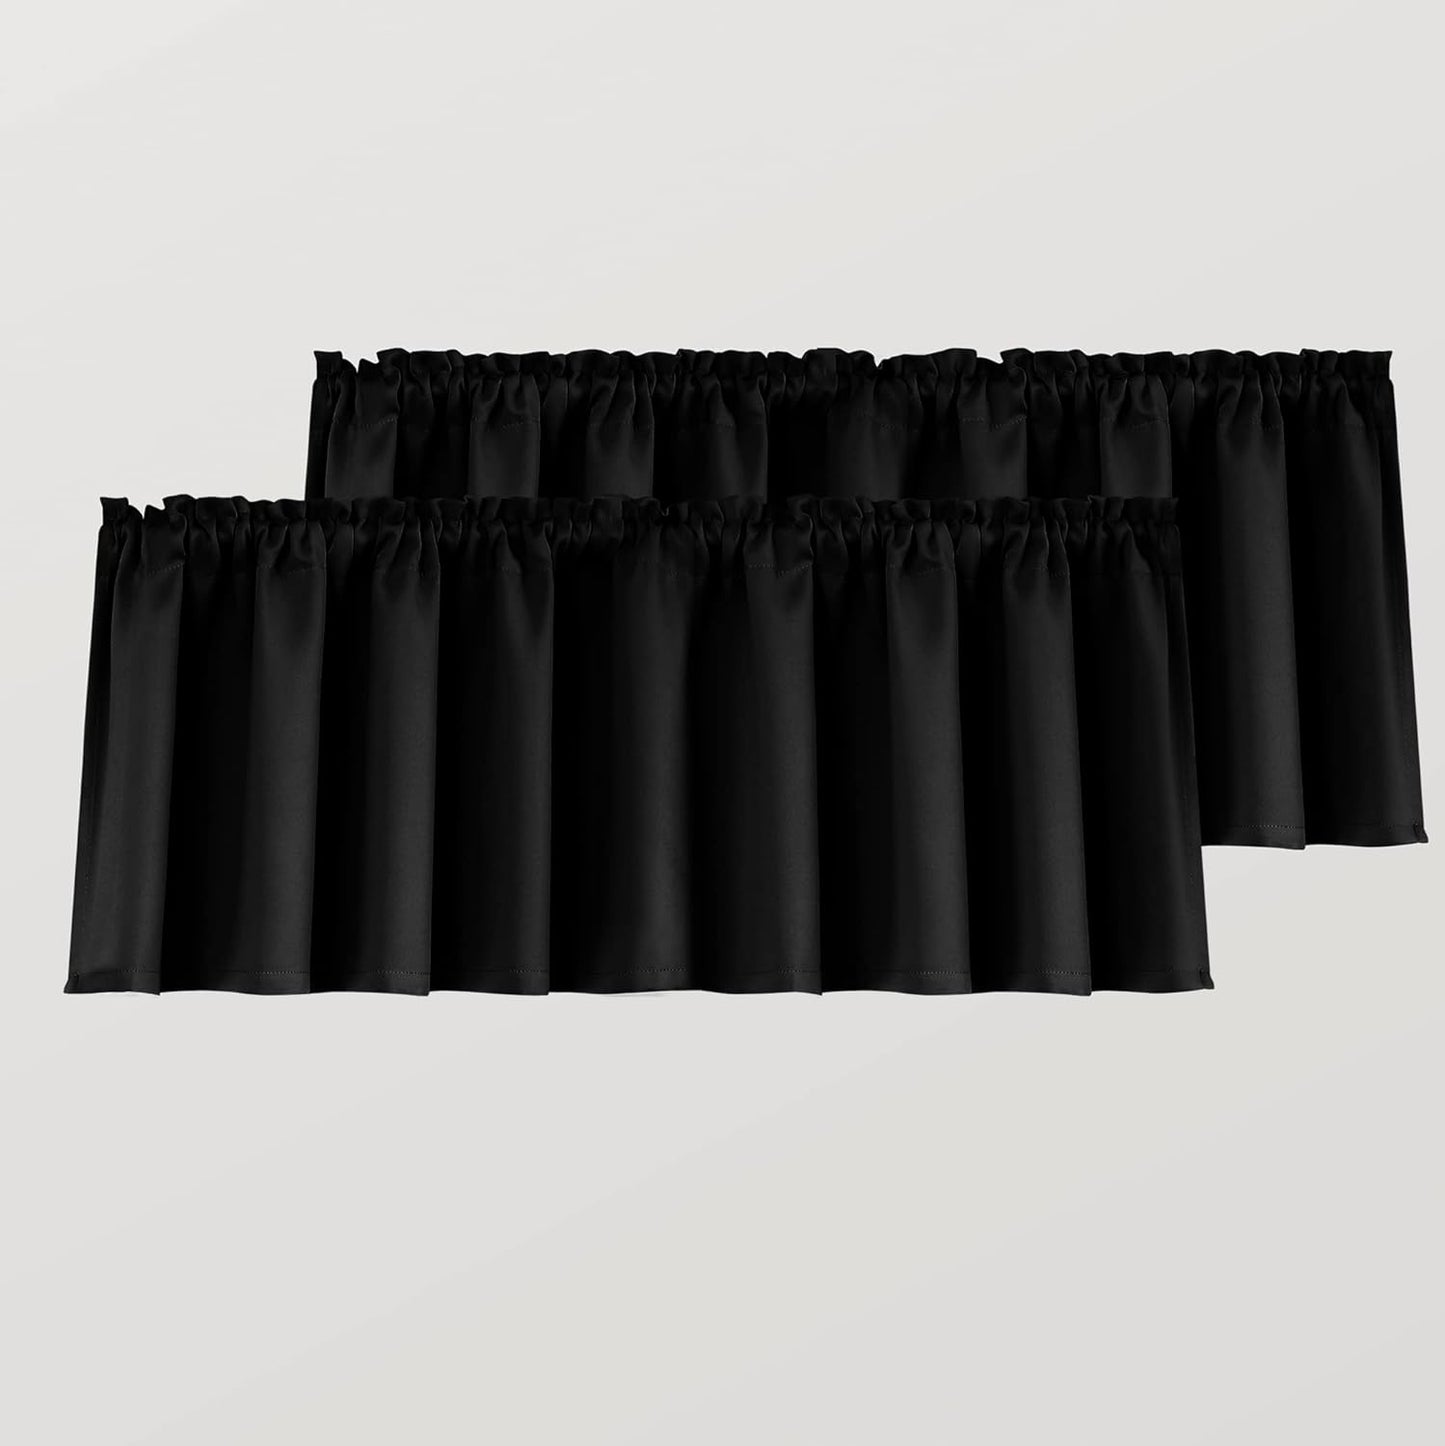 Mrs.Naturall Beige Valance Curtains for Windows 36X16 Inch Length  MRS.NATURALL TEXTILE Black 36X16 